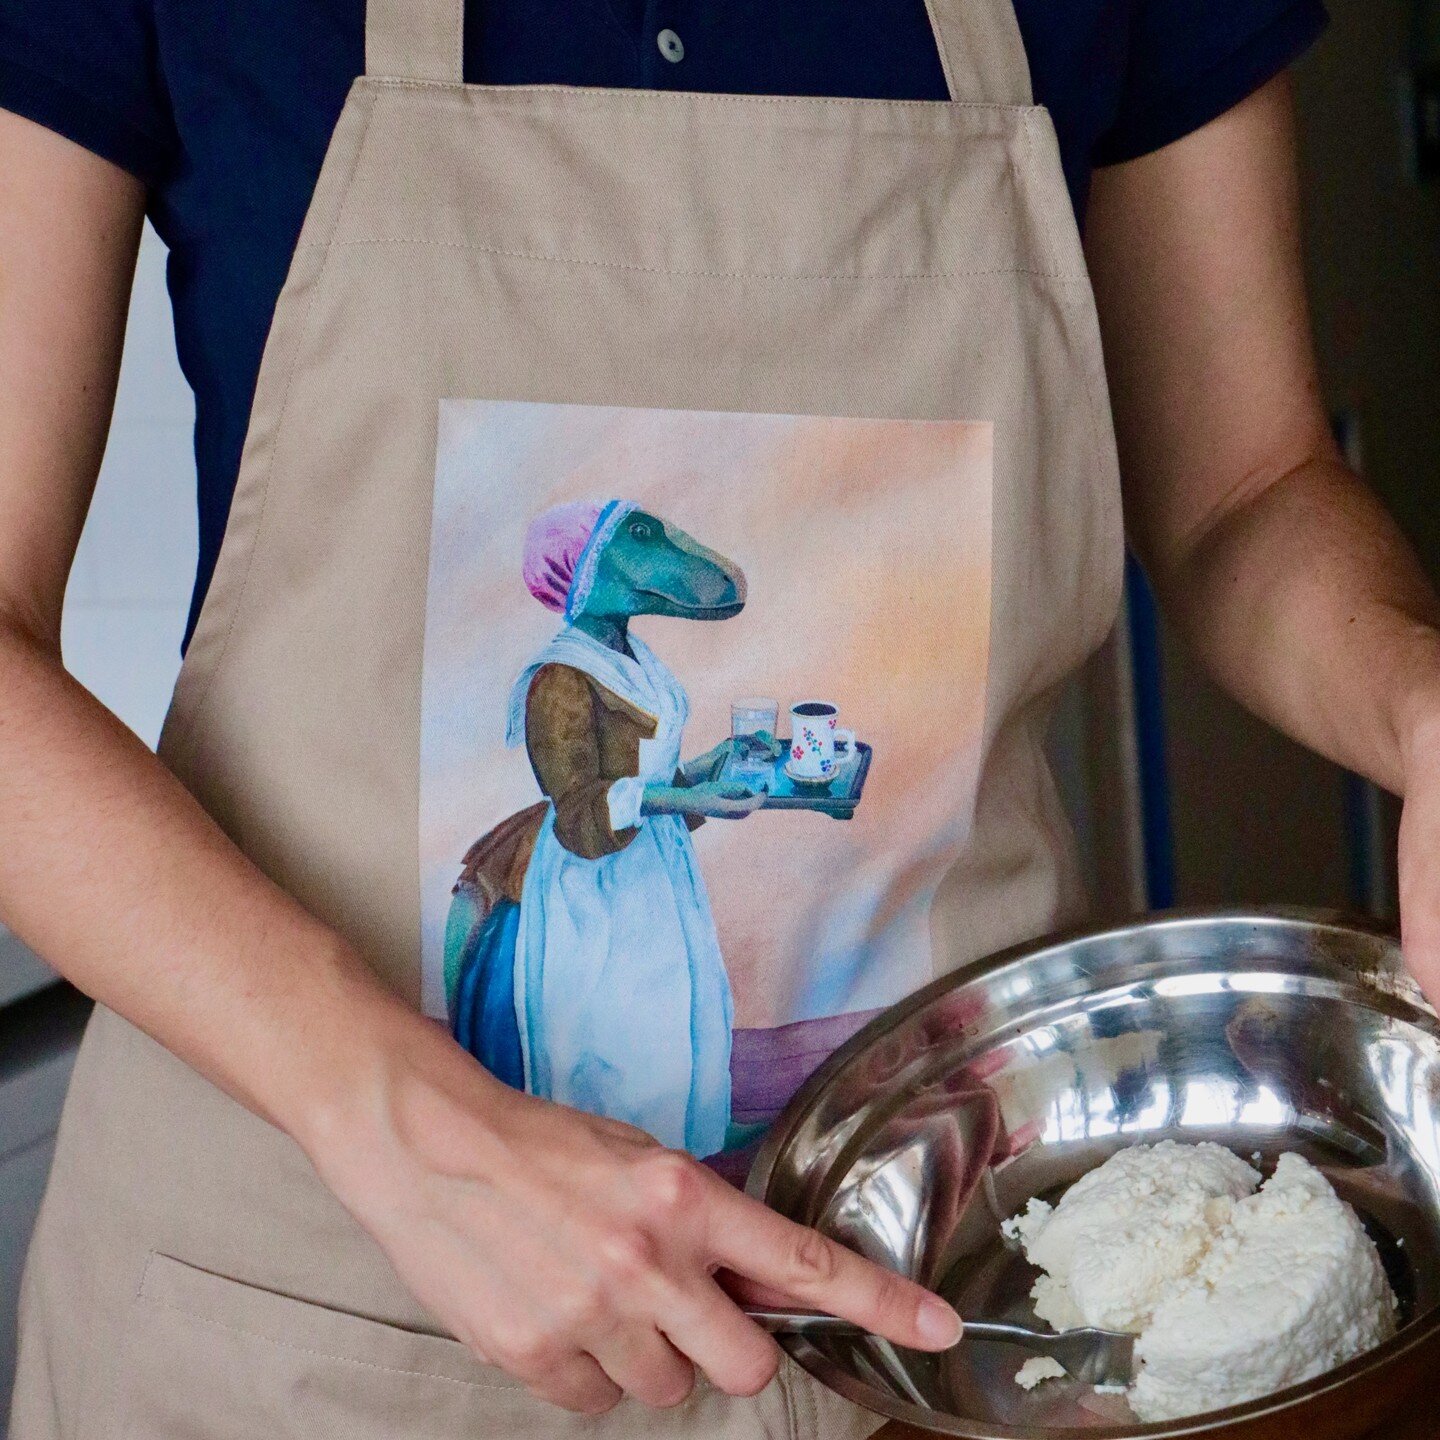 I have my parents visiting right now, so I spent the morning cooking #sirniki - an eastern european kind of quark/cheese pancakes - for us. It was a good moment to put my Chocolate Dino-Girl apron to work, hehe 👩&zwj;🍳 The link to order one is in t